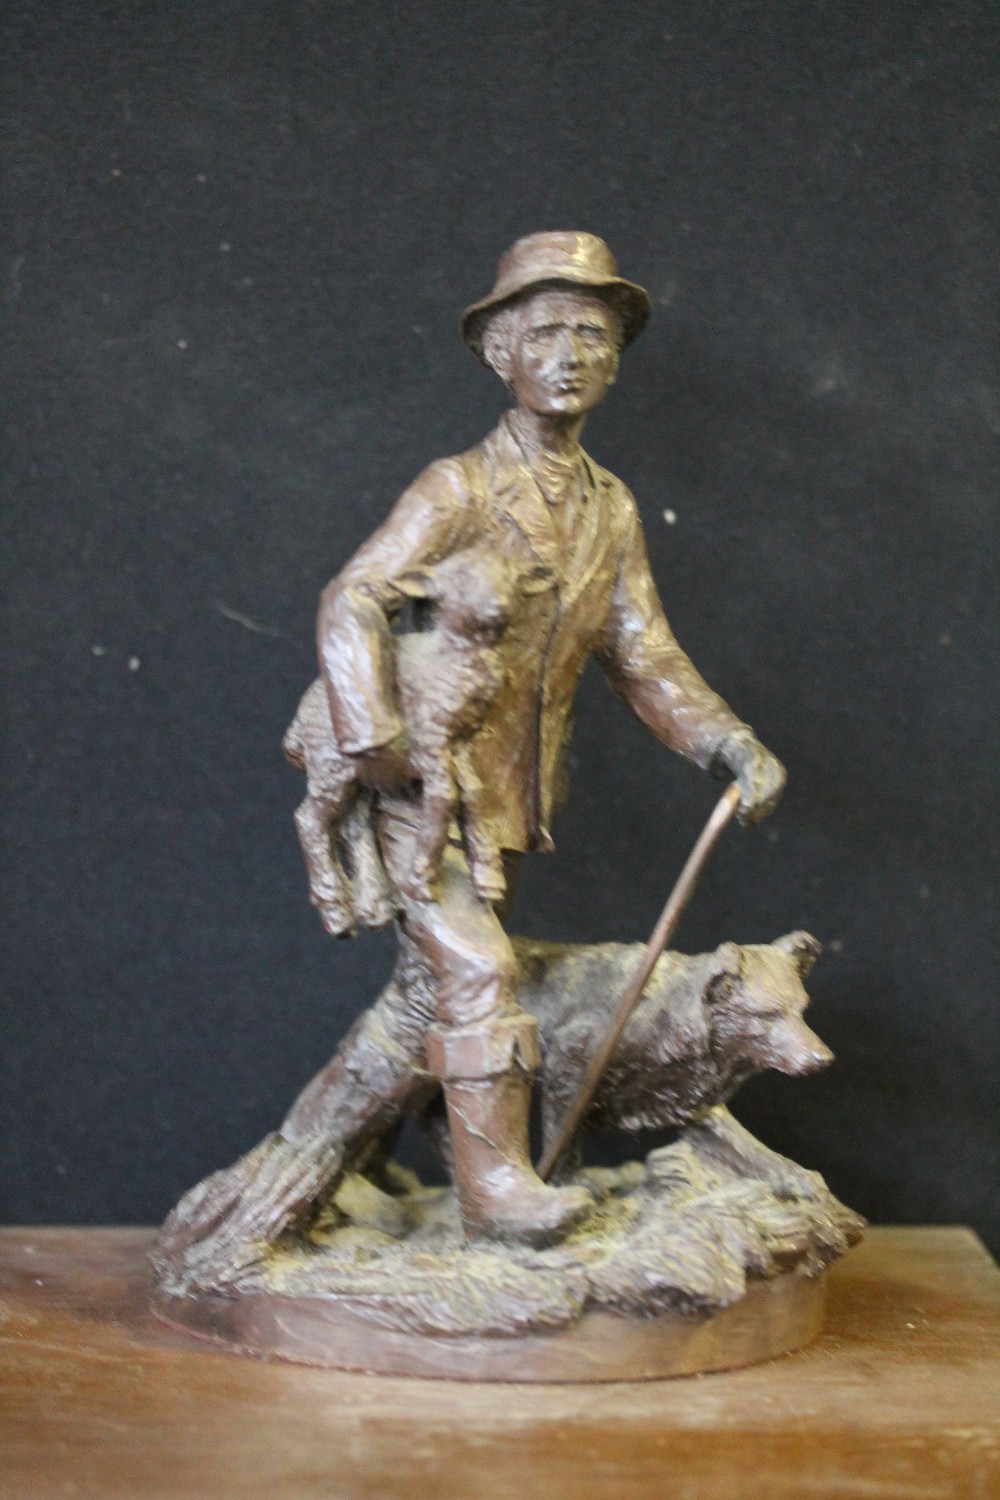 BRONZE STYLE FIGURINES - 5 bronze style figurines and a bronze pirate to include a country - Image 3 of 3